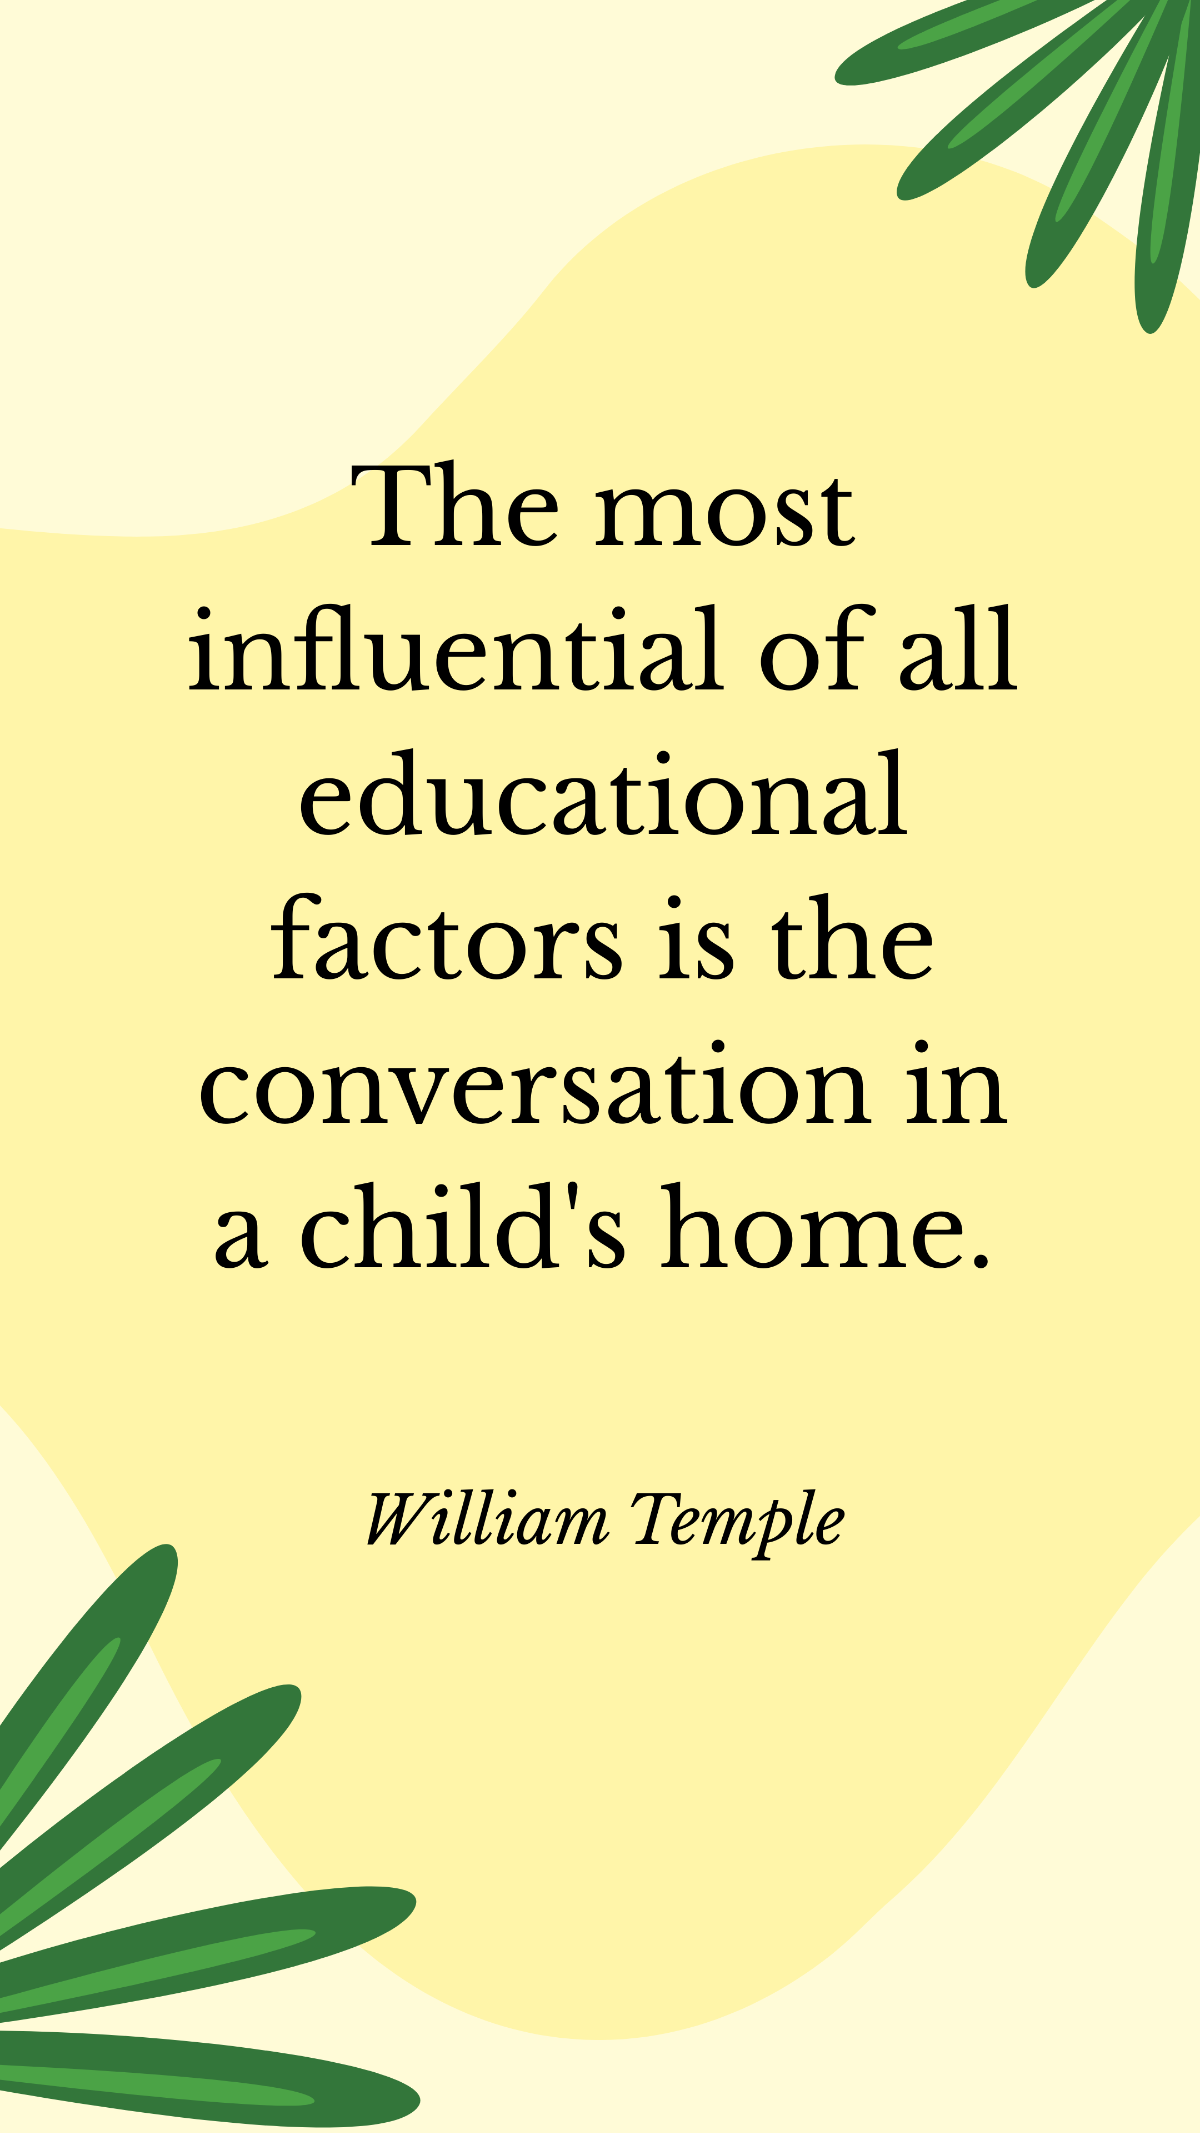 William Temple - The most influential of all educational factors is the conversation in a child's home. Template